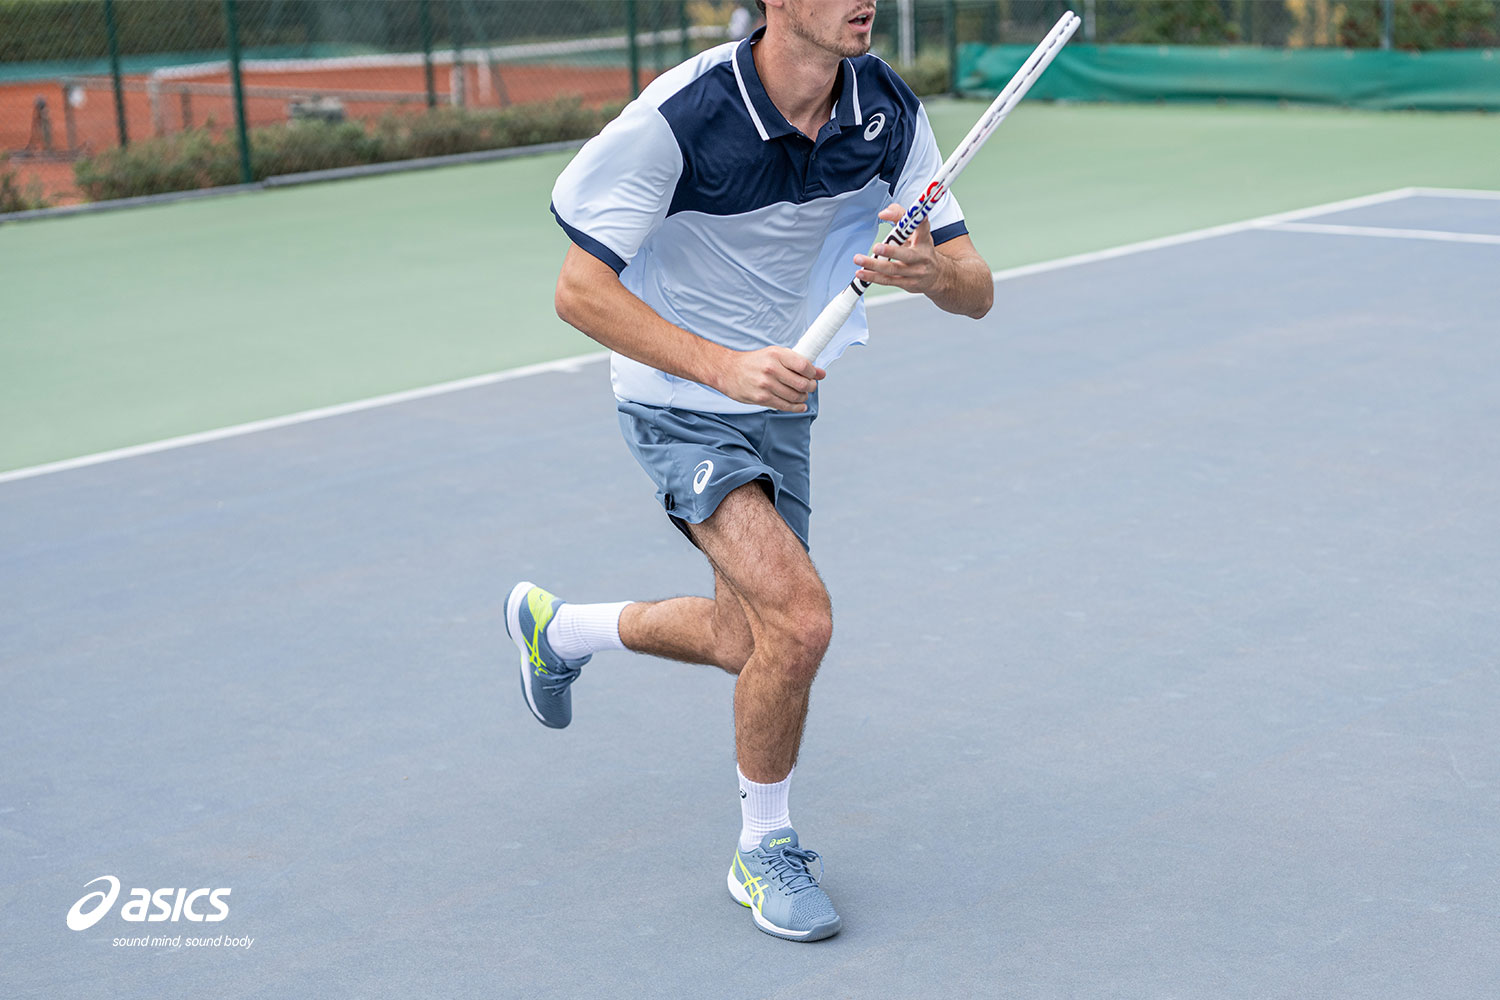 Tennis Clothing Guide: What to Wear to Play Tennis | ASICS